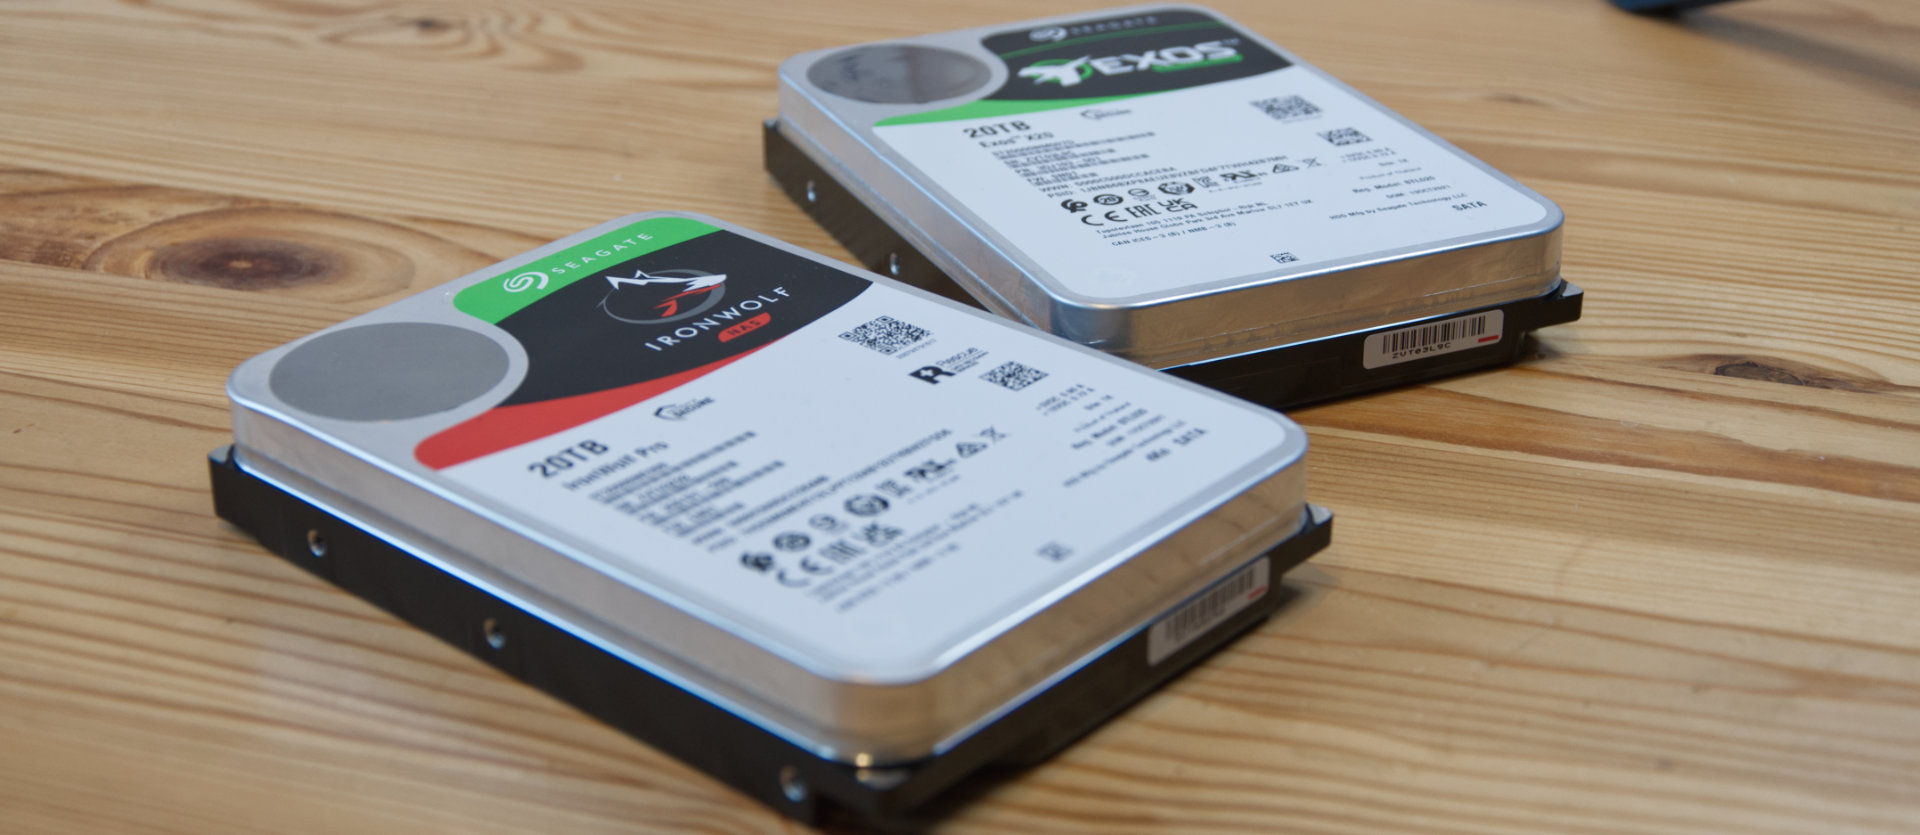 Seagate IronWolf Pro 20TB NAS HDD Review 